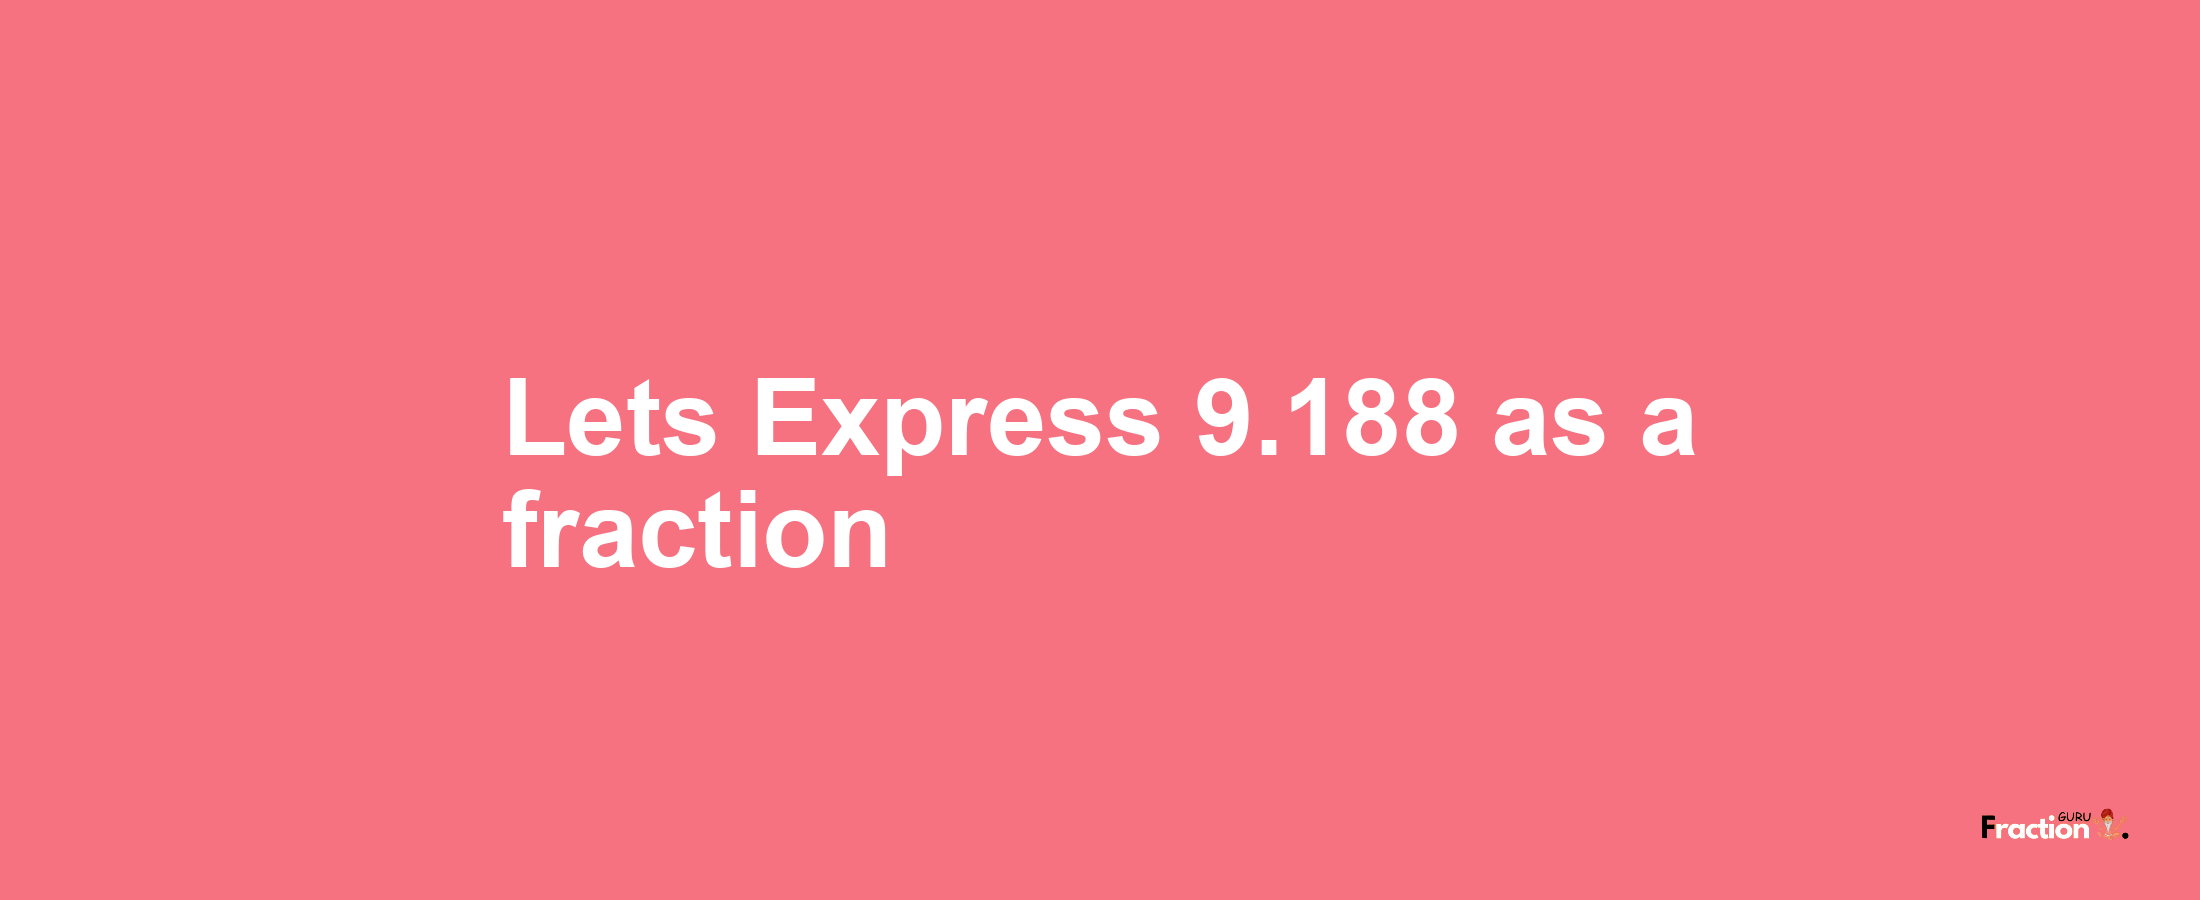 Lets Express 9.188 as afraction